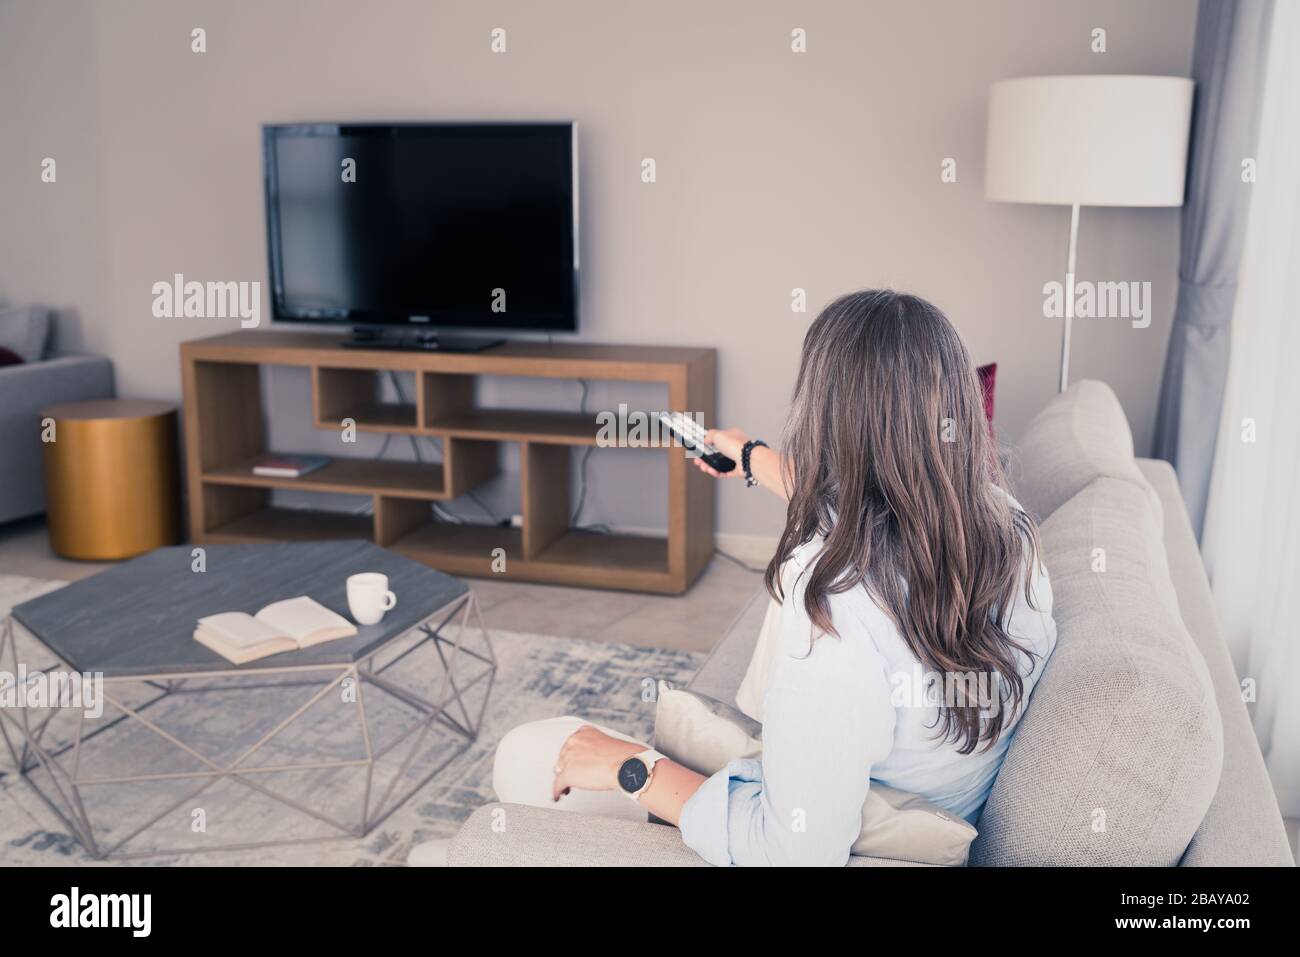 A woman on a sofa getting ready to watch TV Stock Photo